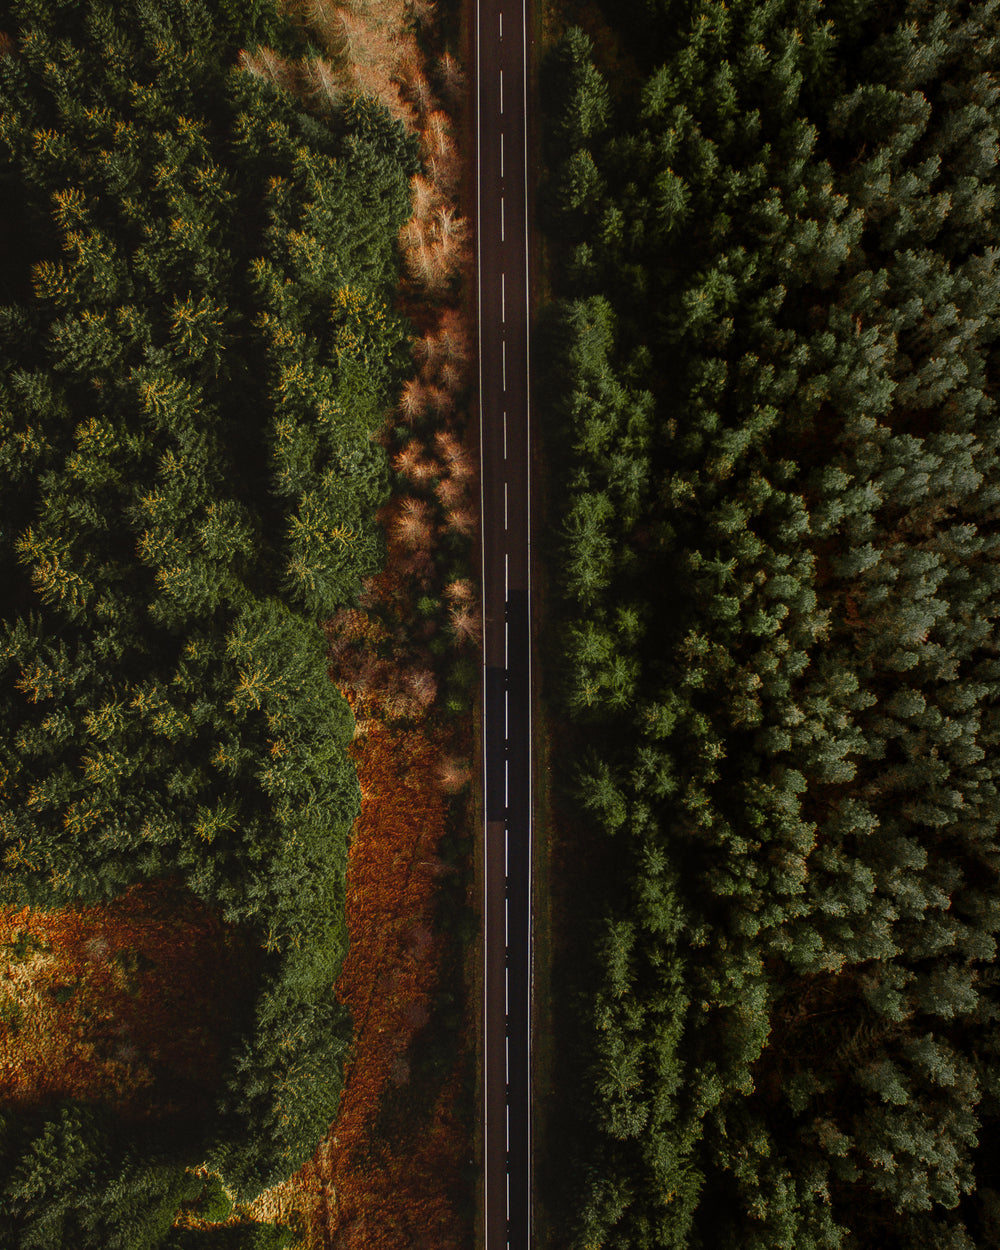 aerial photo of paved road surrounded by trees